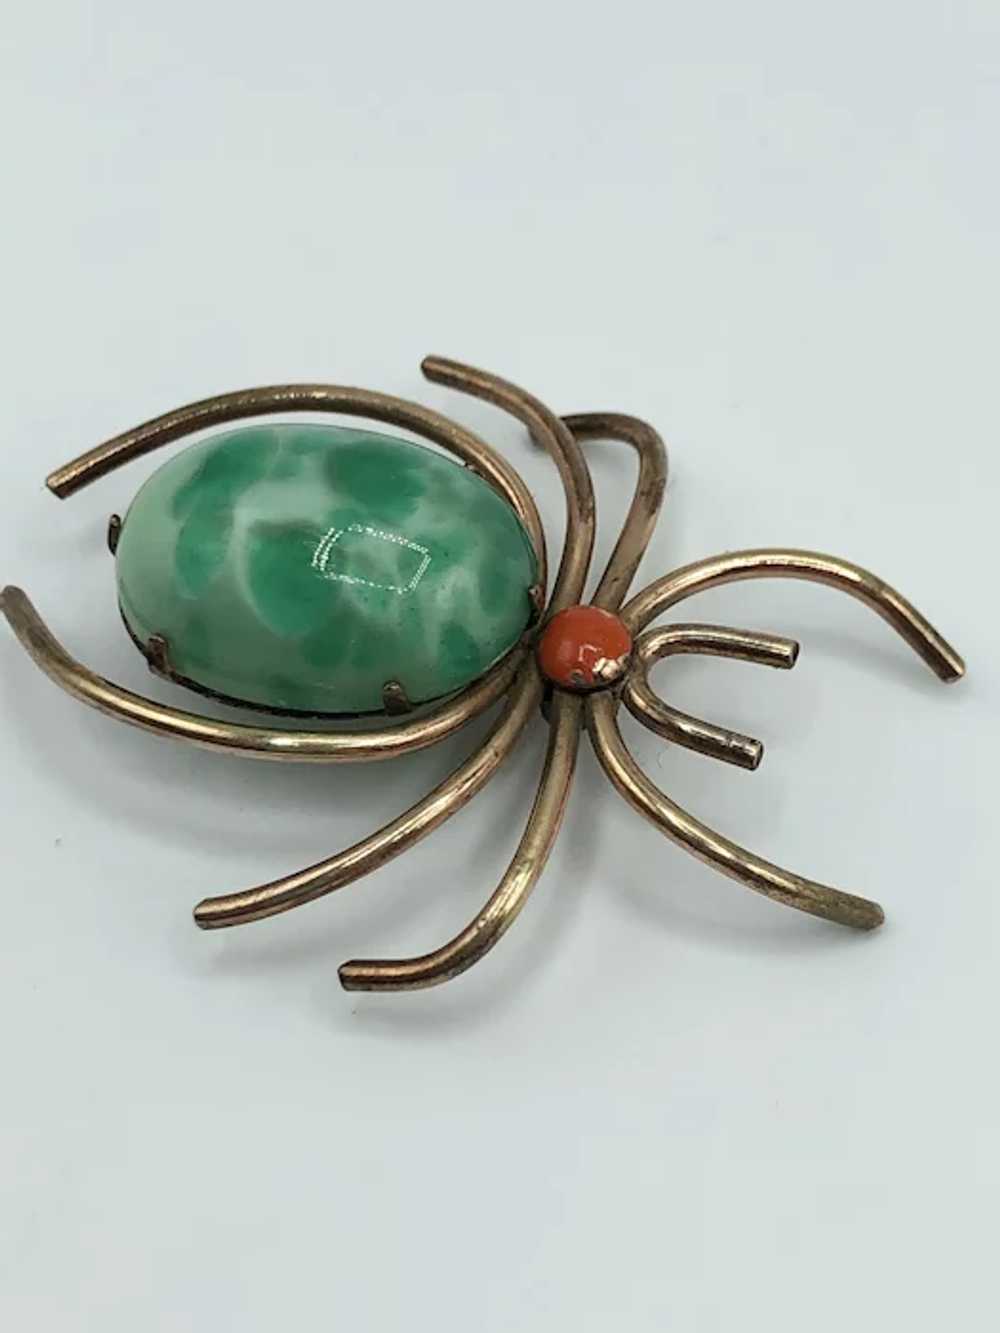 10k Gold Filled White Co Spider Brooch Pin - image 3